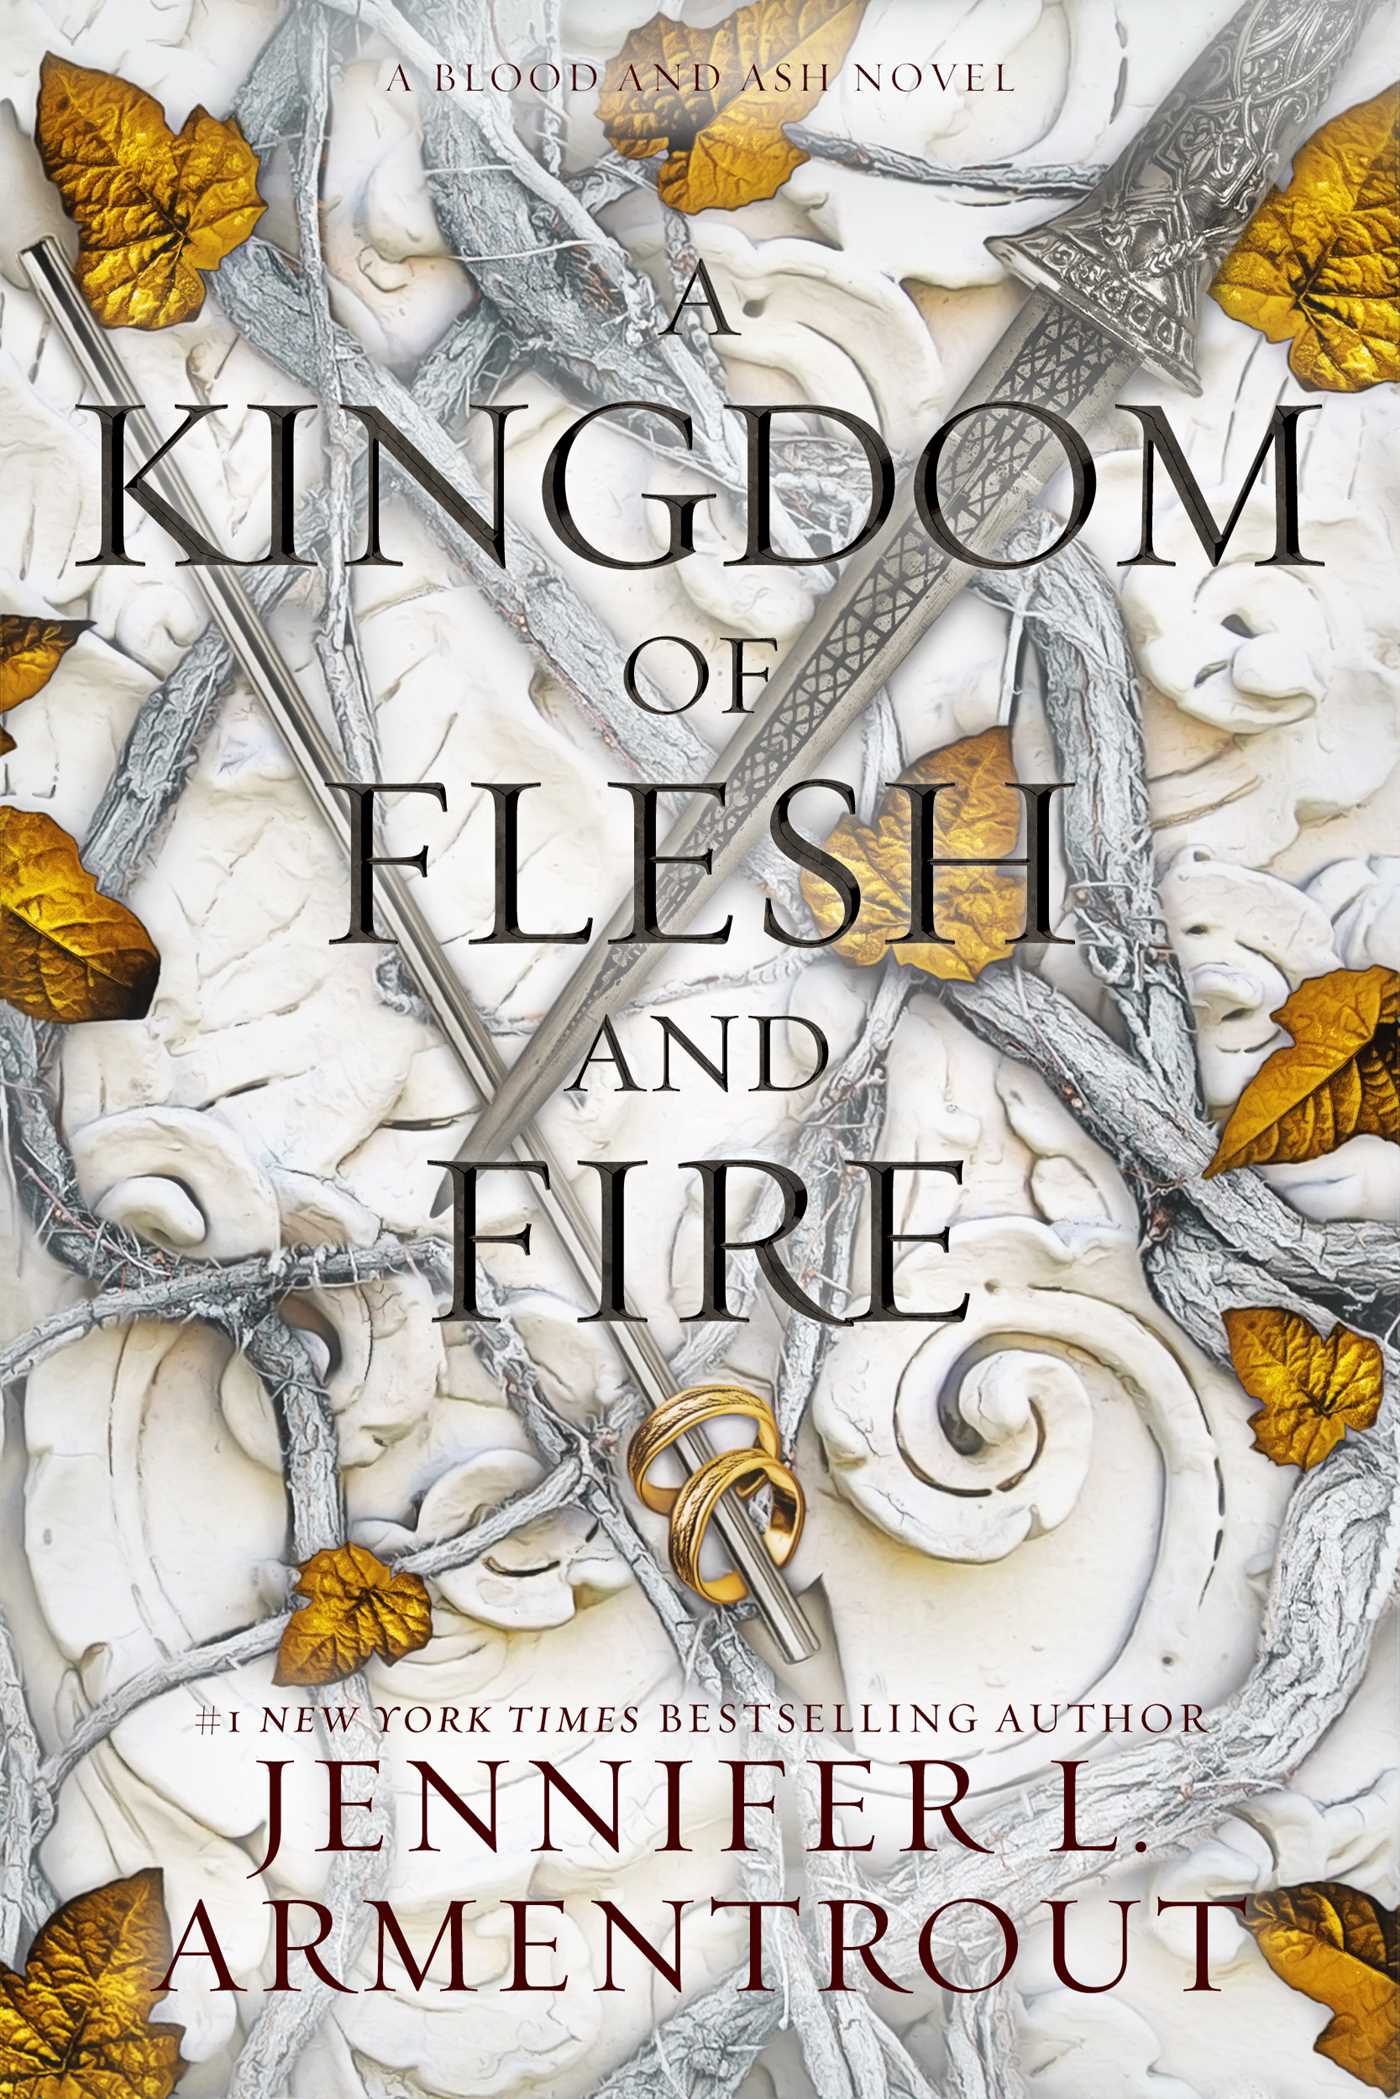 From Blood and ash Vol.02 - A Kingdom of Flesh and Fire (Hardback) | Science-fiction & Fantasy